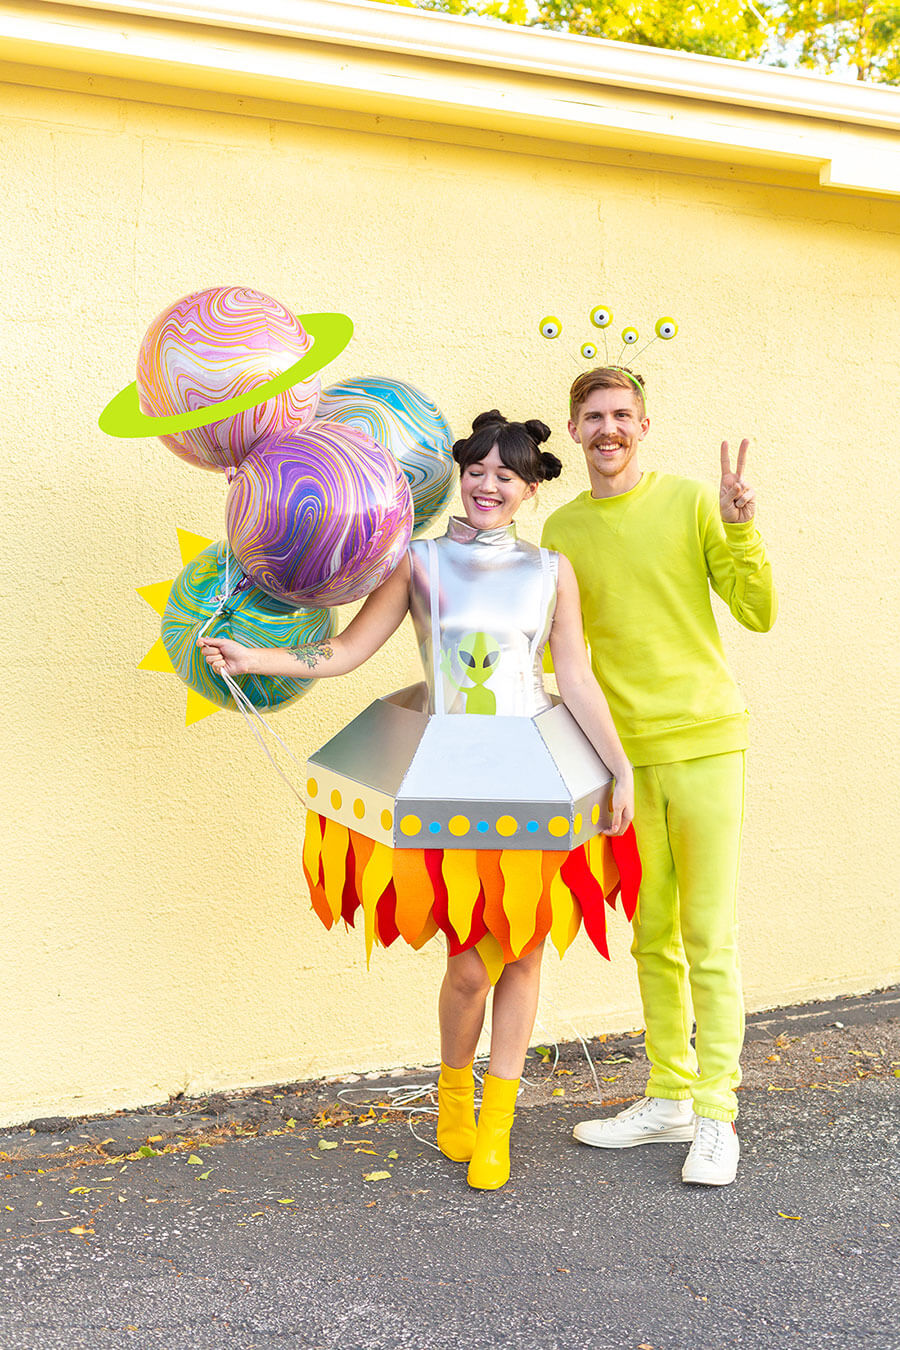 creative DIY couples costumes - alien and spaceship